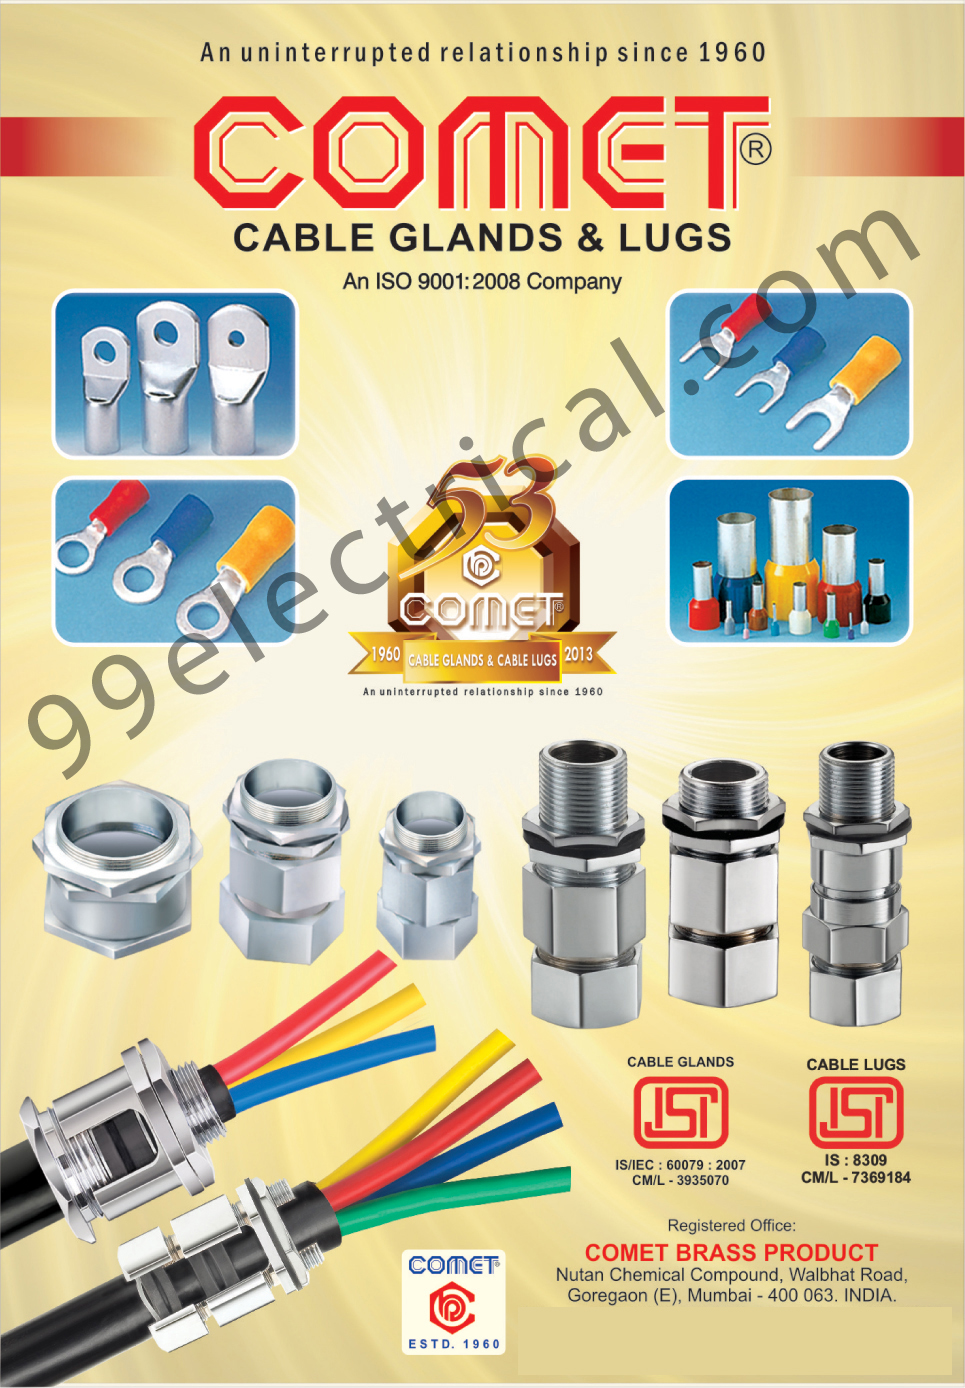 Cable Glands, Cable Lugs,Electrical Parts, Lugs, Glands, Cable Accessories, Cable Connectors, Cable Terminals, Conductors